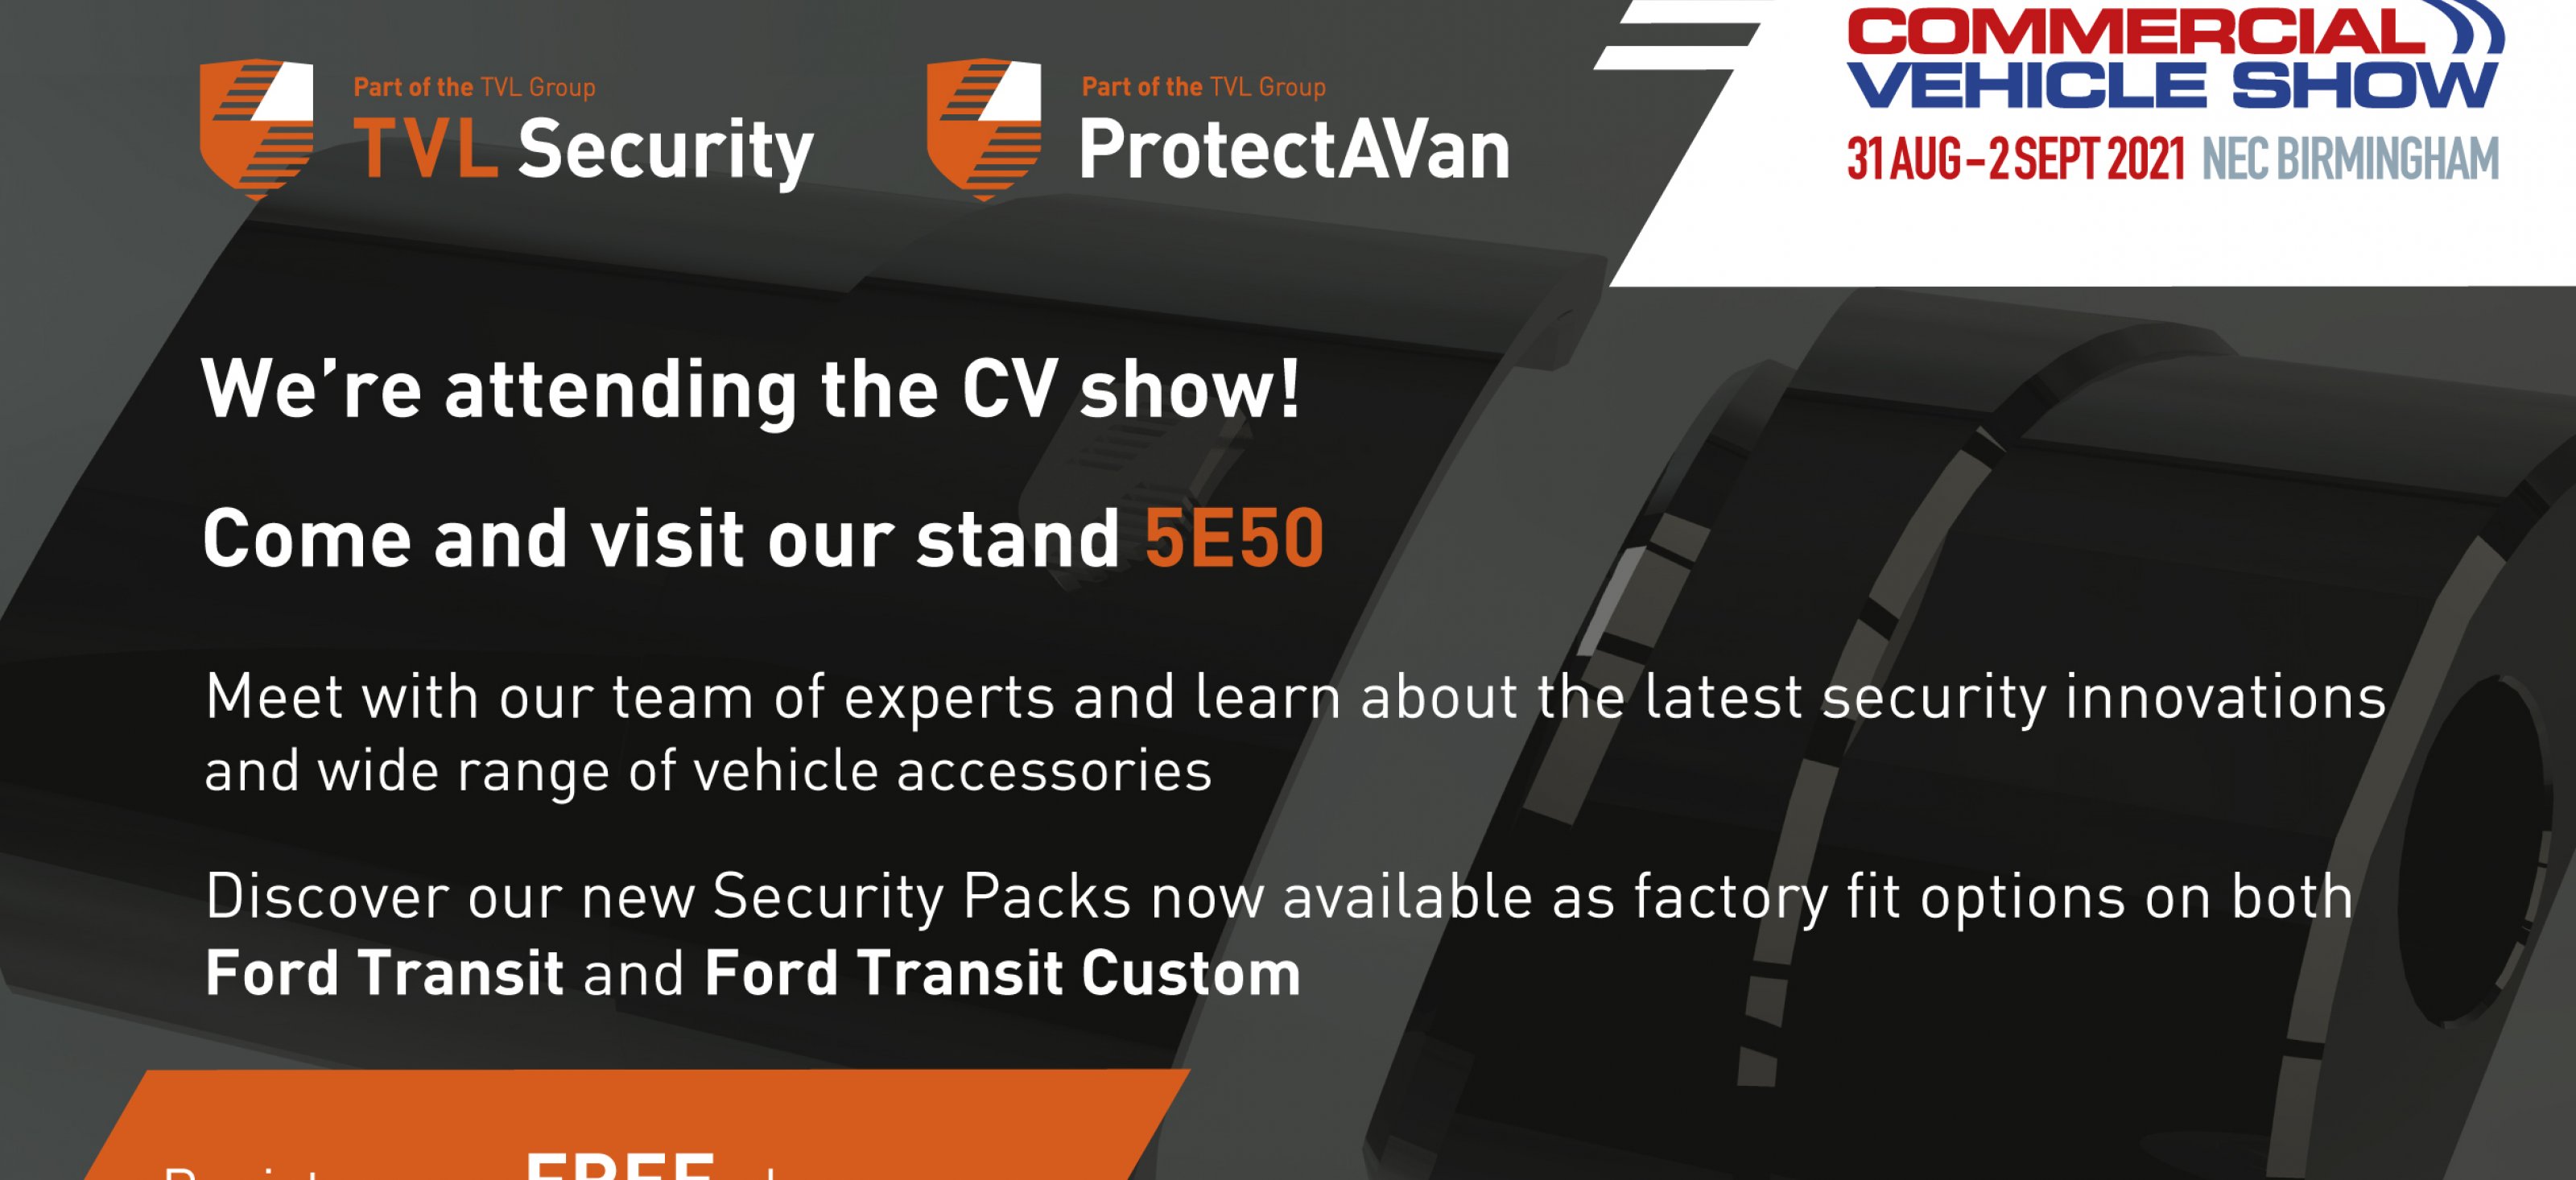 TVL Security and ProtectAVan are attending the CV show